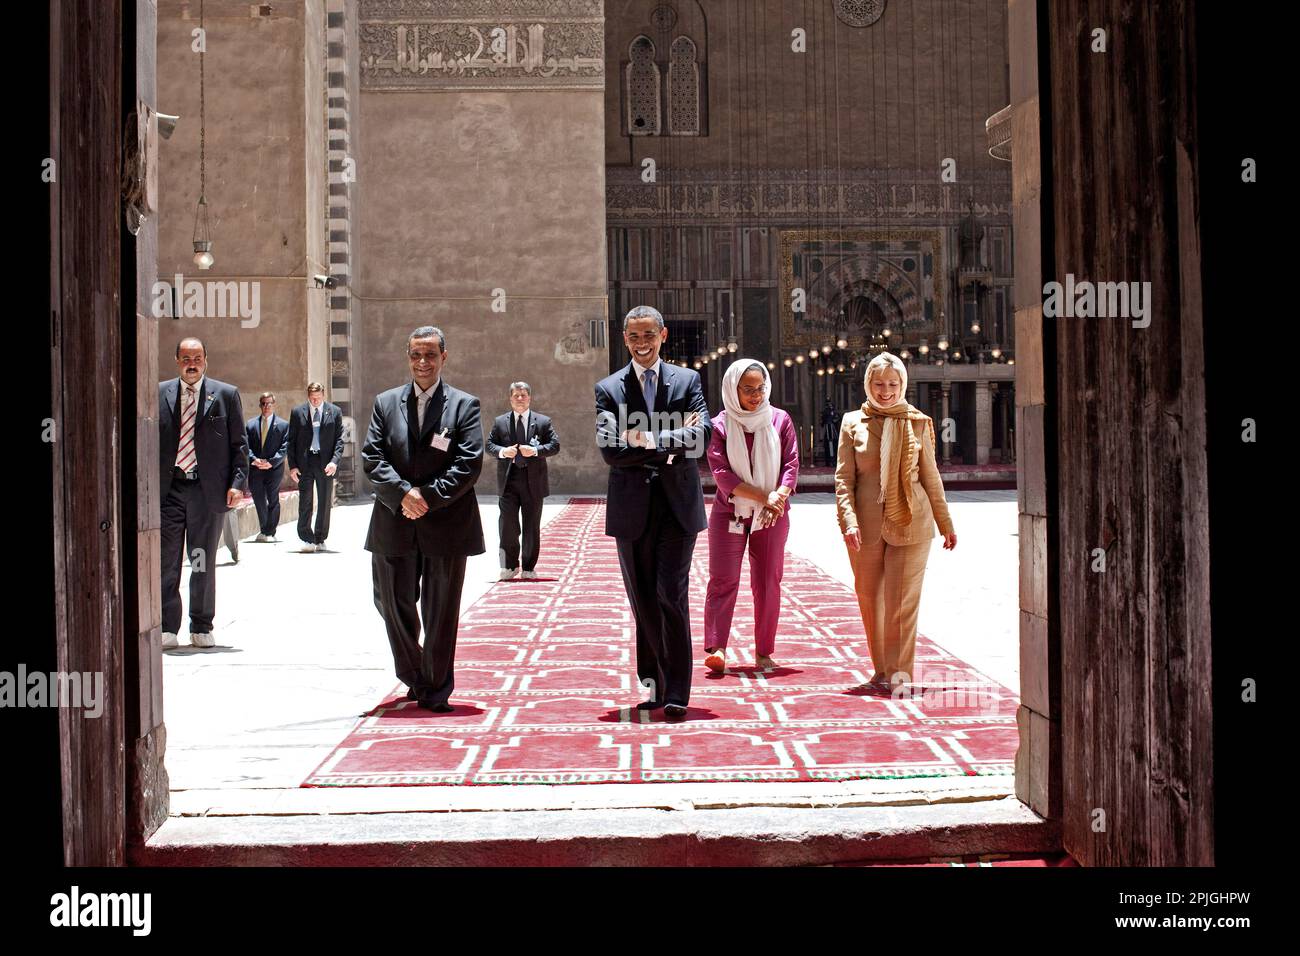 President Barack Obama tours the Sultan Hassan Mosque with Dr. Zahi Hawass (left), Iman Abdel Fateh (right), and Secretary of State Hillary Clinton in Cairo, Egypt, June 4, 2009. (Official White House Photo by Pete Souza).  This official White House photograph is being made available for publication by news organizations and/or for personal use printing by the subject(s) of the photograph. The photograph may not be manipulated in any way or used in materials, advertisements, products, or promotions that in any way suggest approval or endorsement of the President, the First Family, or the White Stock Photo